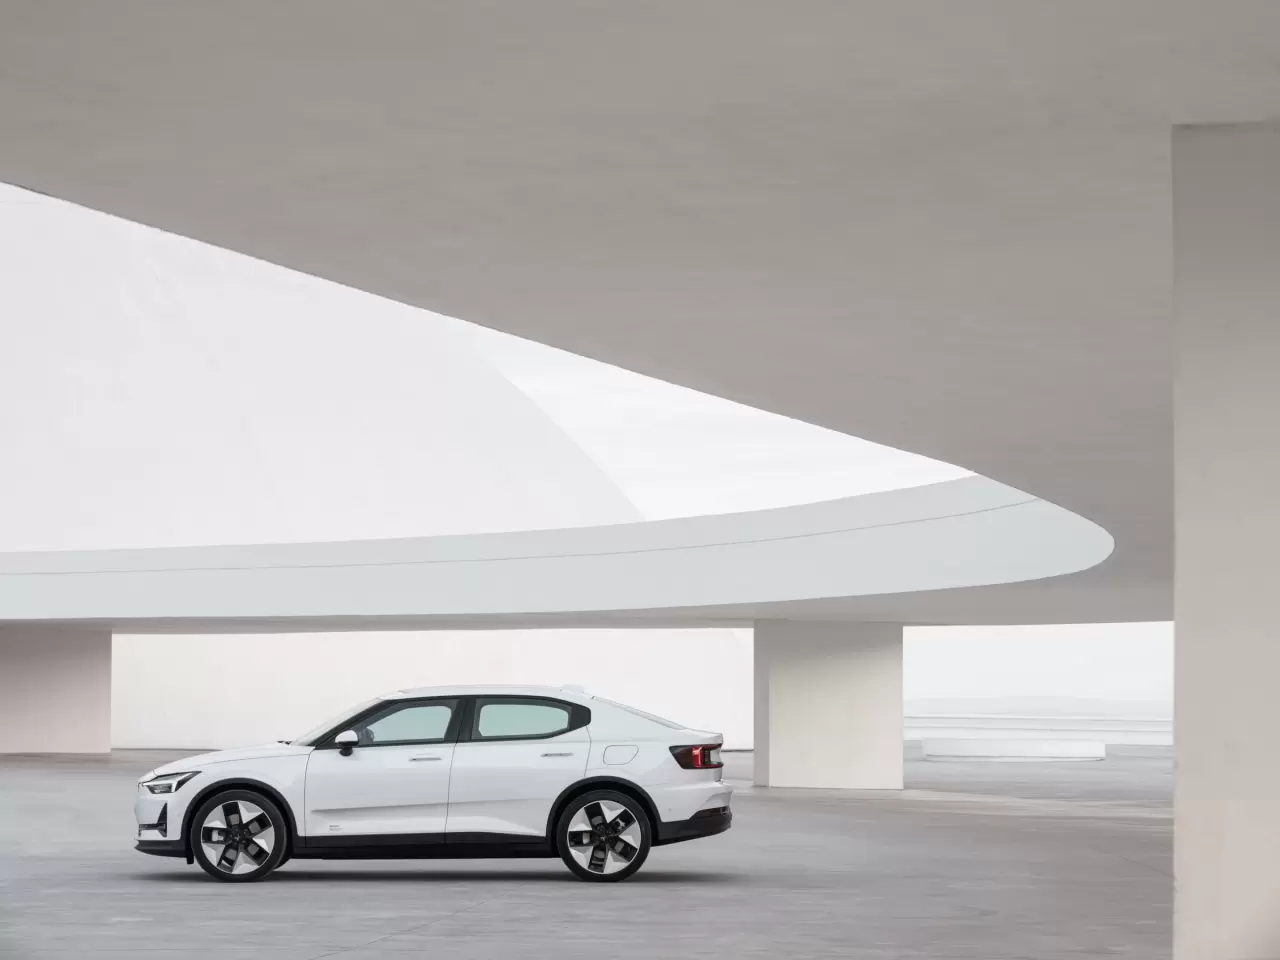 Polestar reports global volumes for the third quarter of 2022 and confirms full year outlook